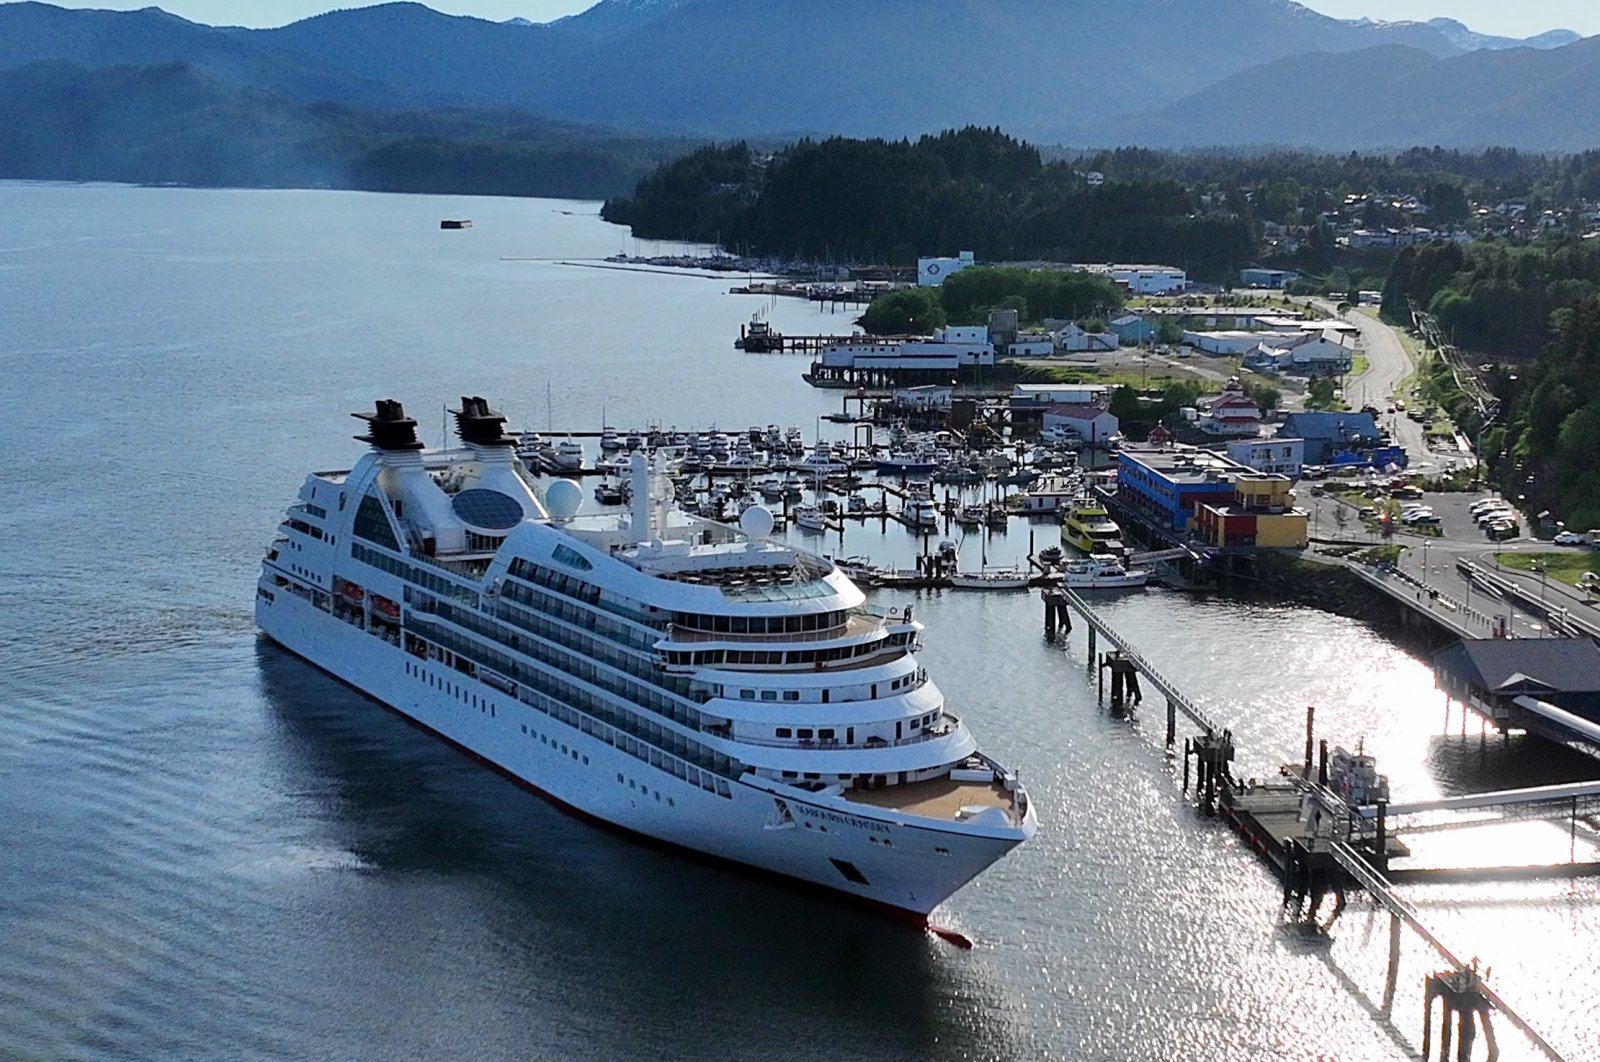 A cruise ship is seen near the Prince Rupert Cruise Port in British Columbia, Canada, in this undated file photo. (Courtesy of Global Ports Holding)